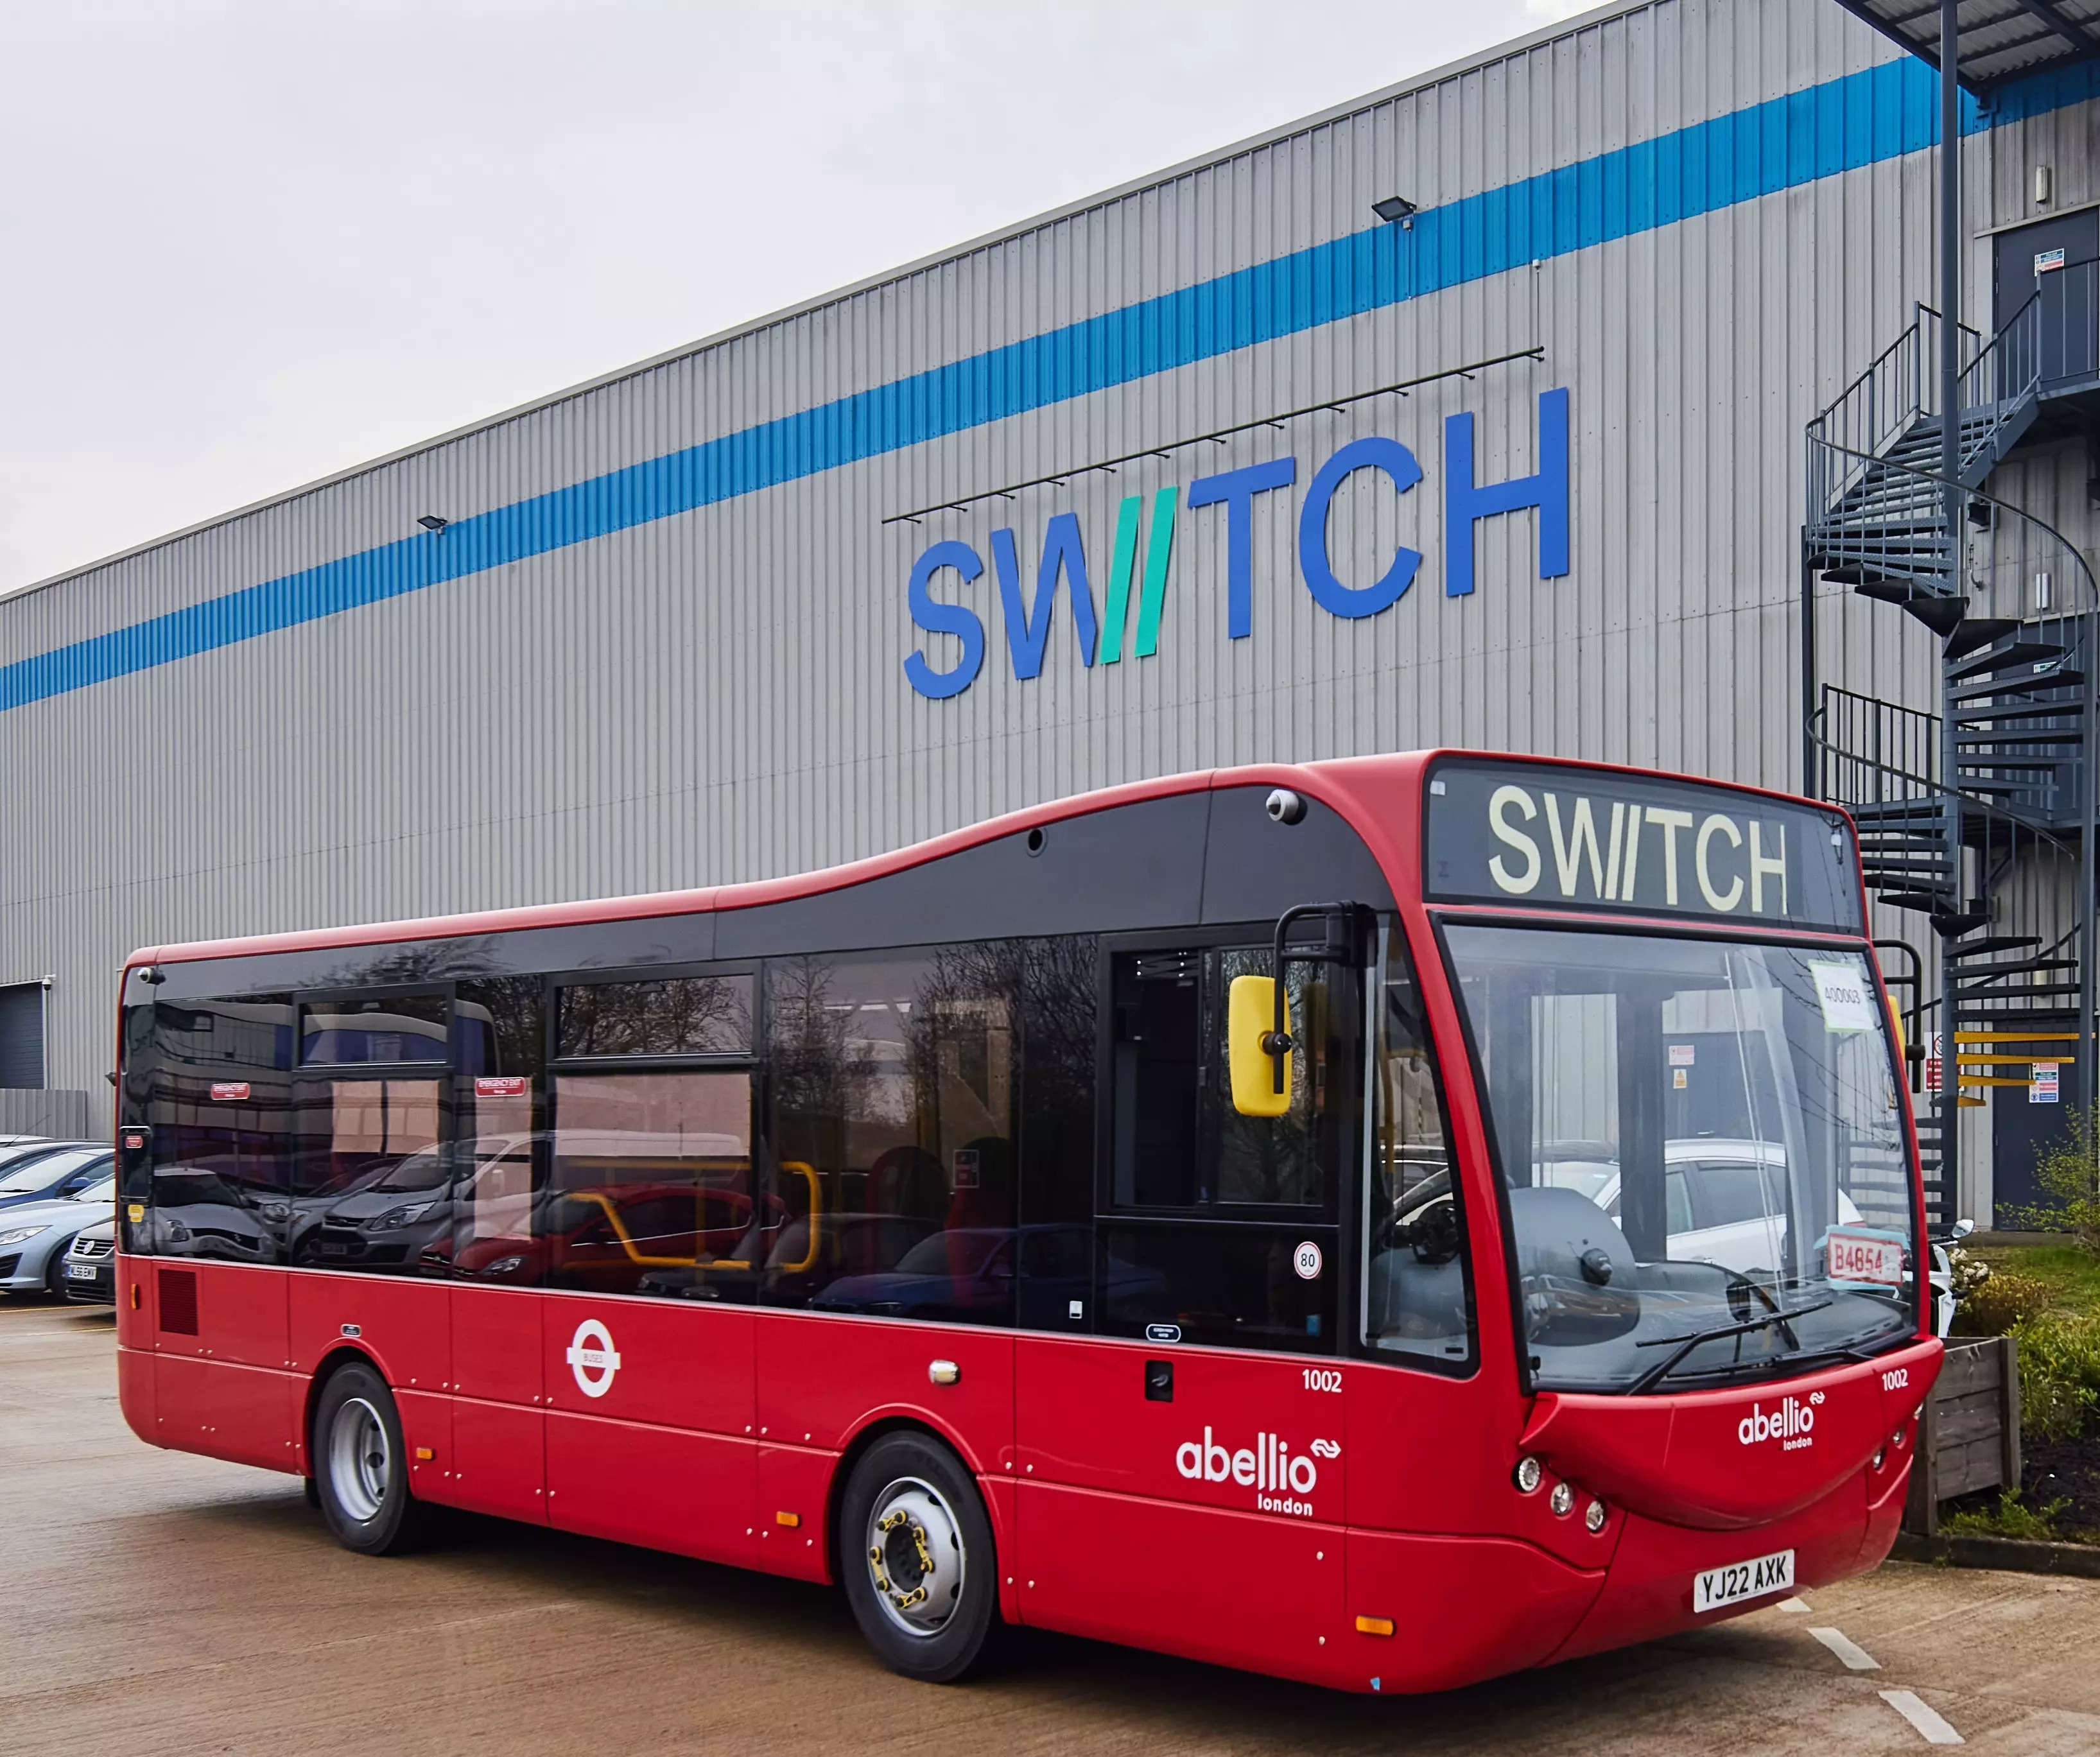  With sales of only a little over 300 buses between the UK and India markets, Switch Mobility has a lot of ground to cover to qualify as a major player in the global market.